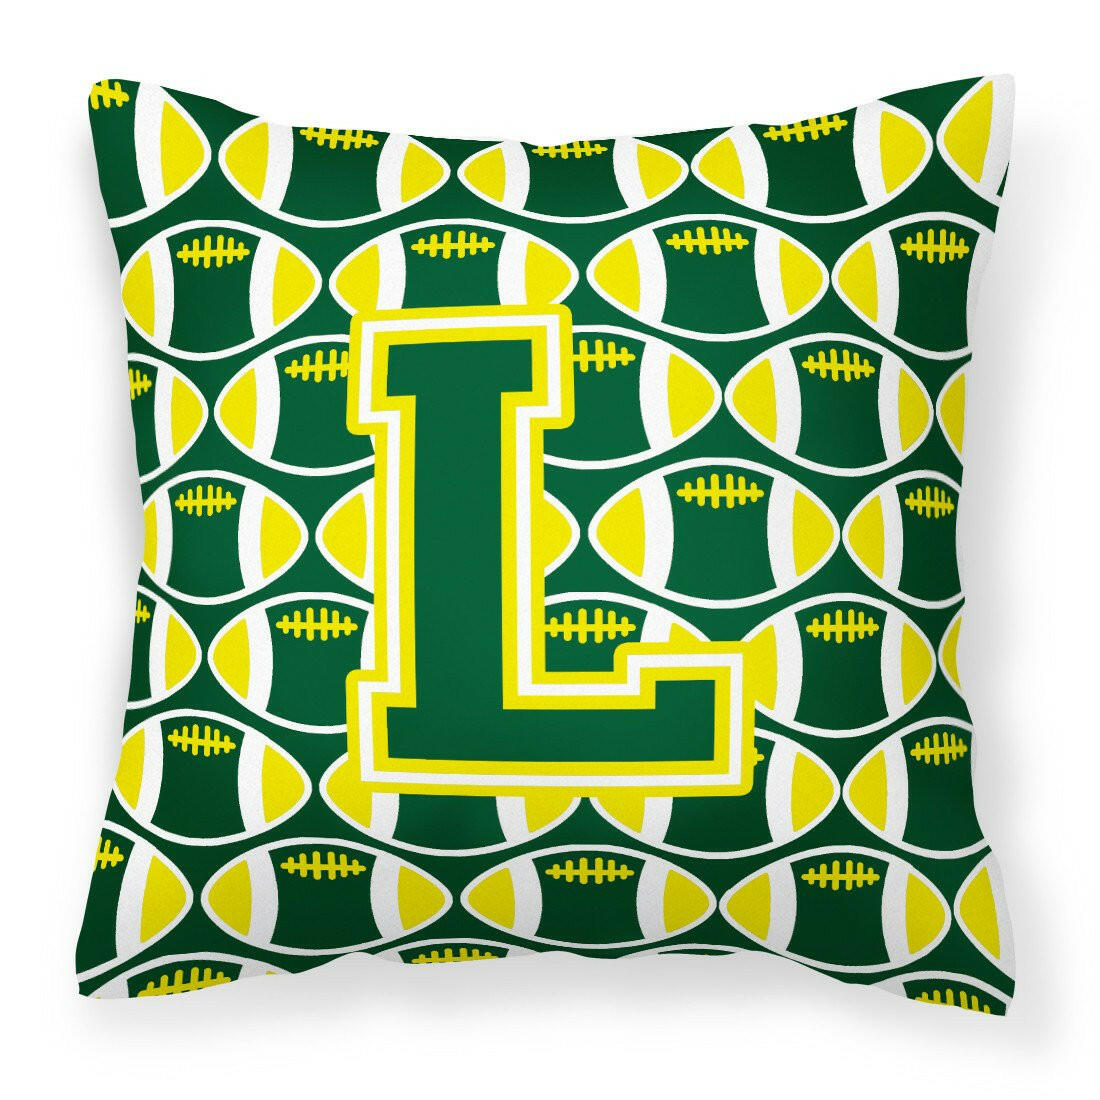 Letter L Football Green and Yellow Fabric Decorative Pillow CJ1075-LPW1414 by Caroline's Treasures